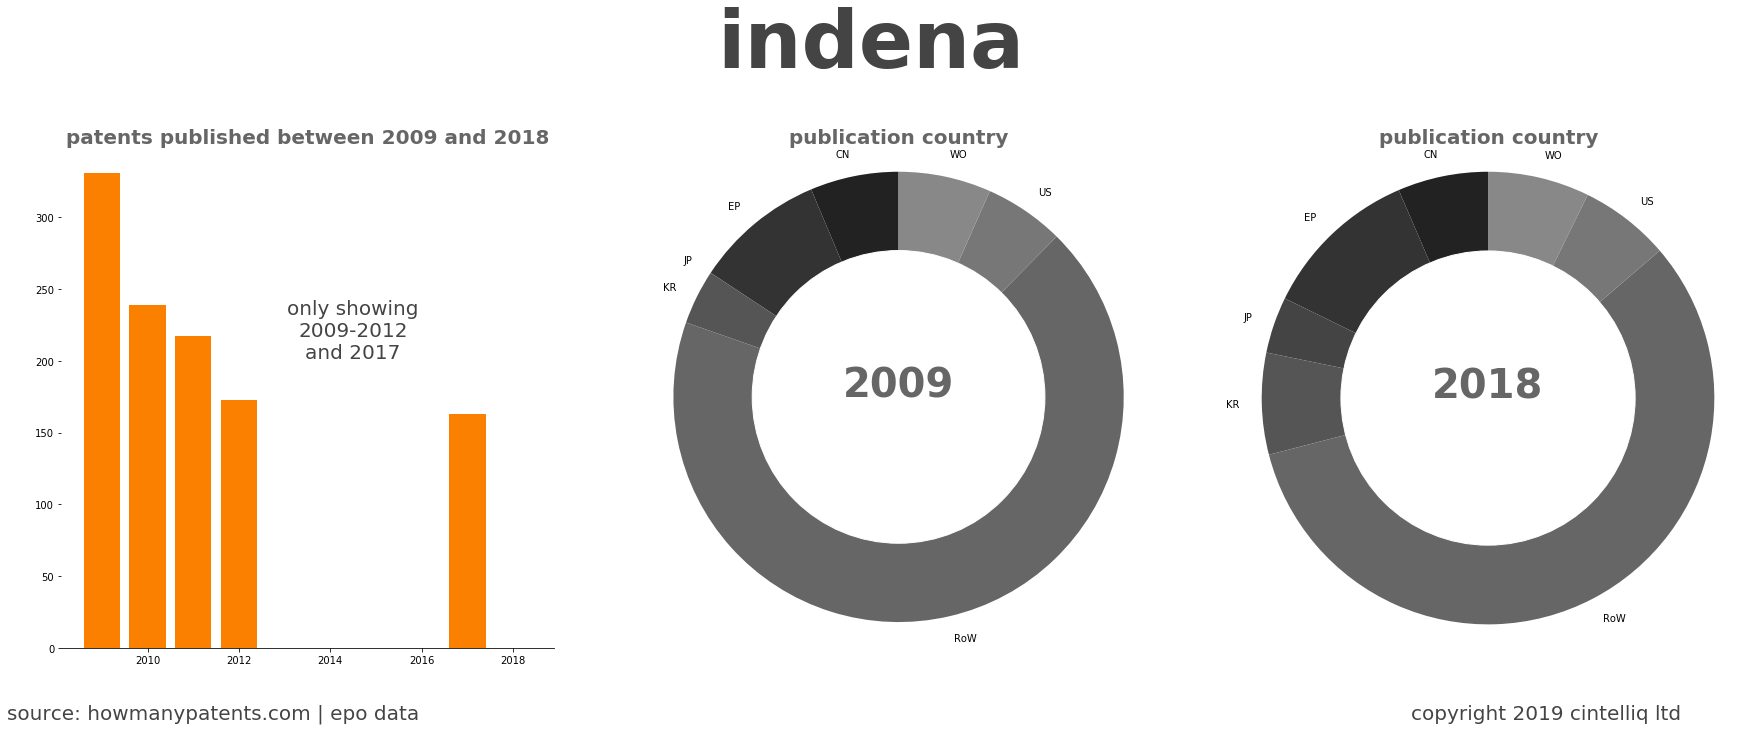 summary of patents for Indena